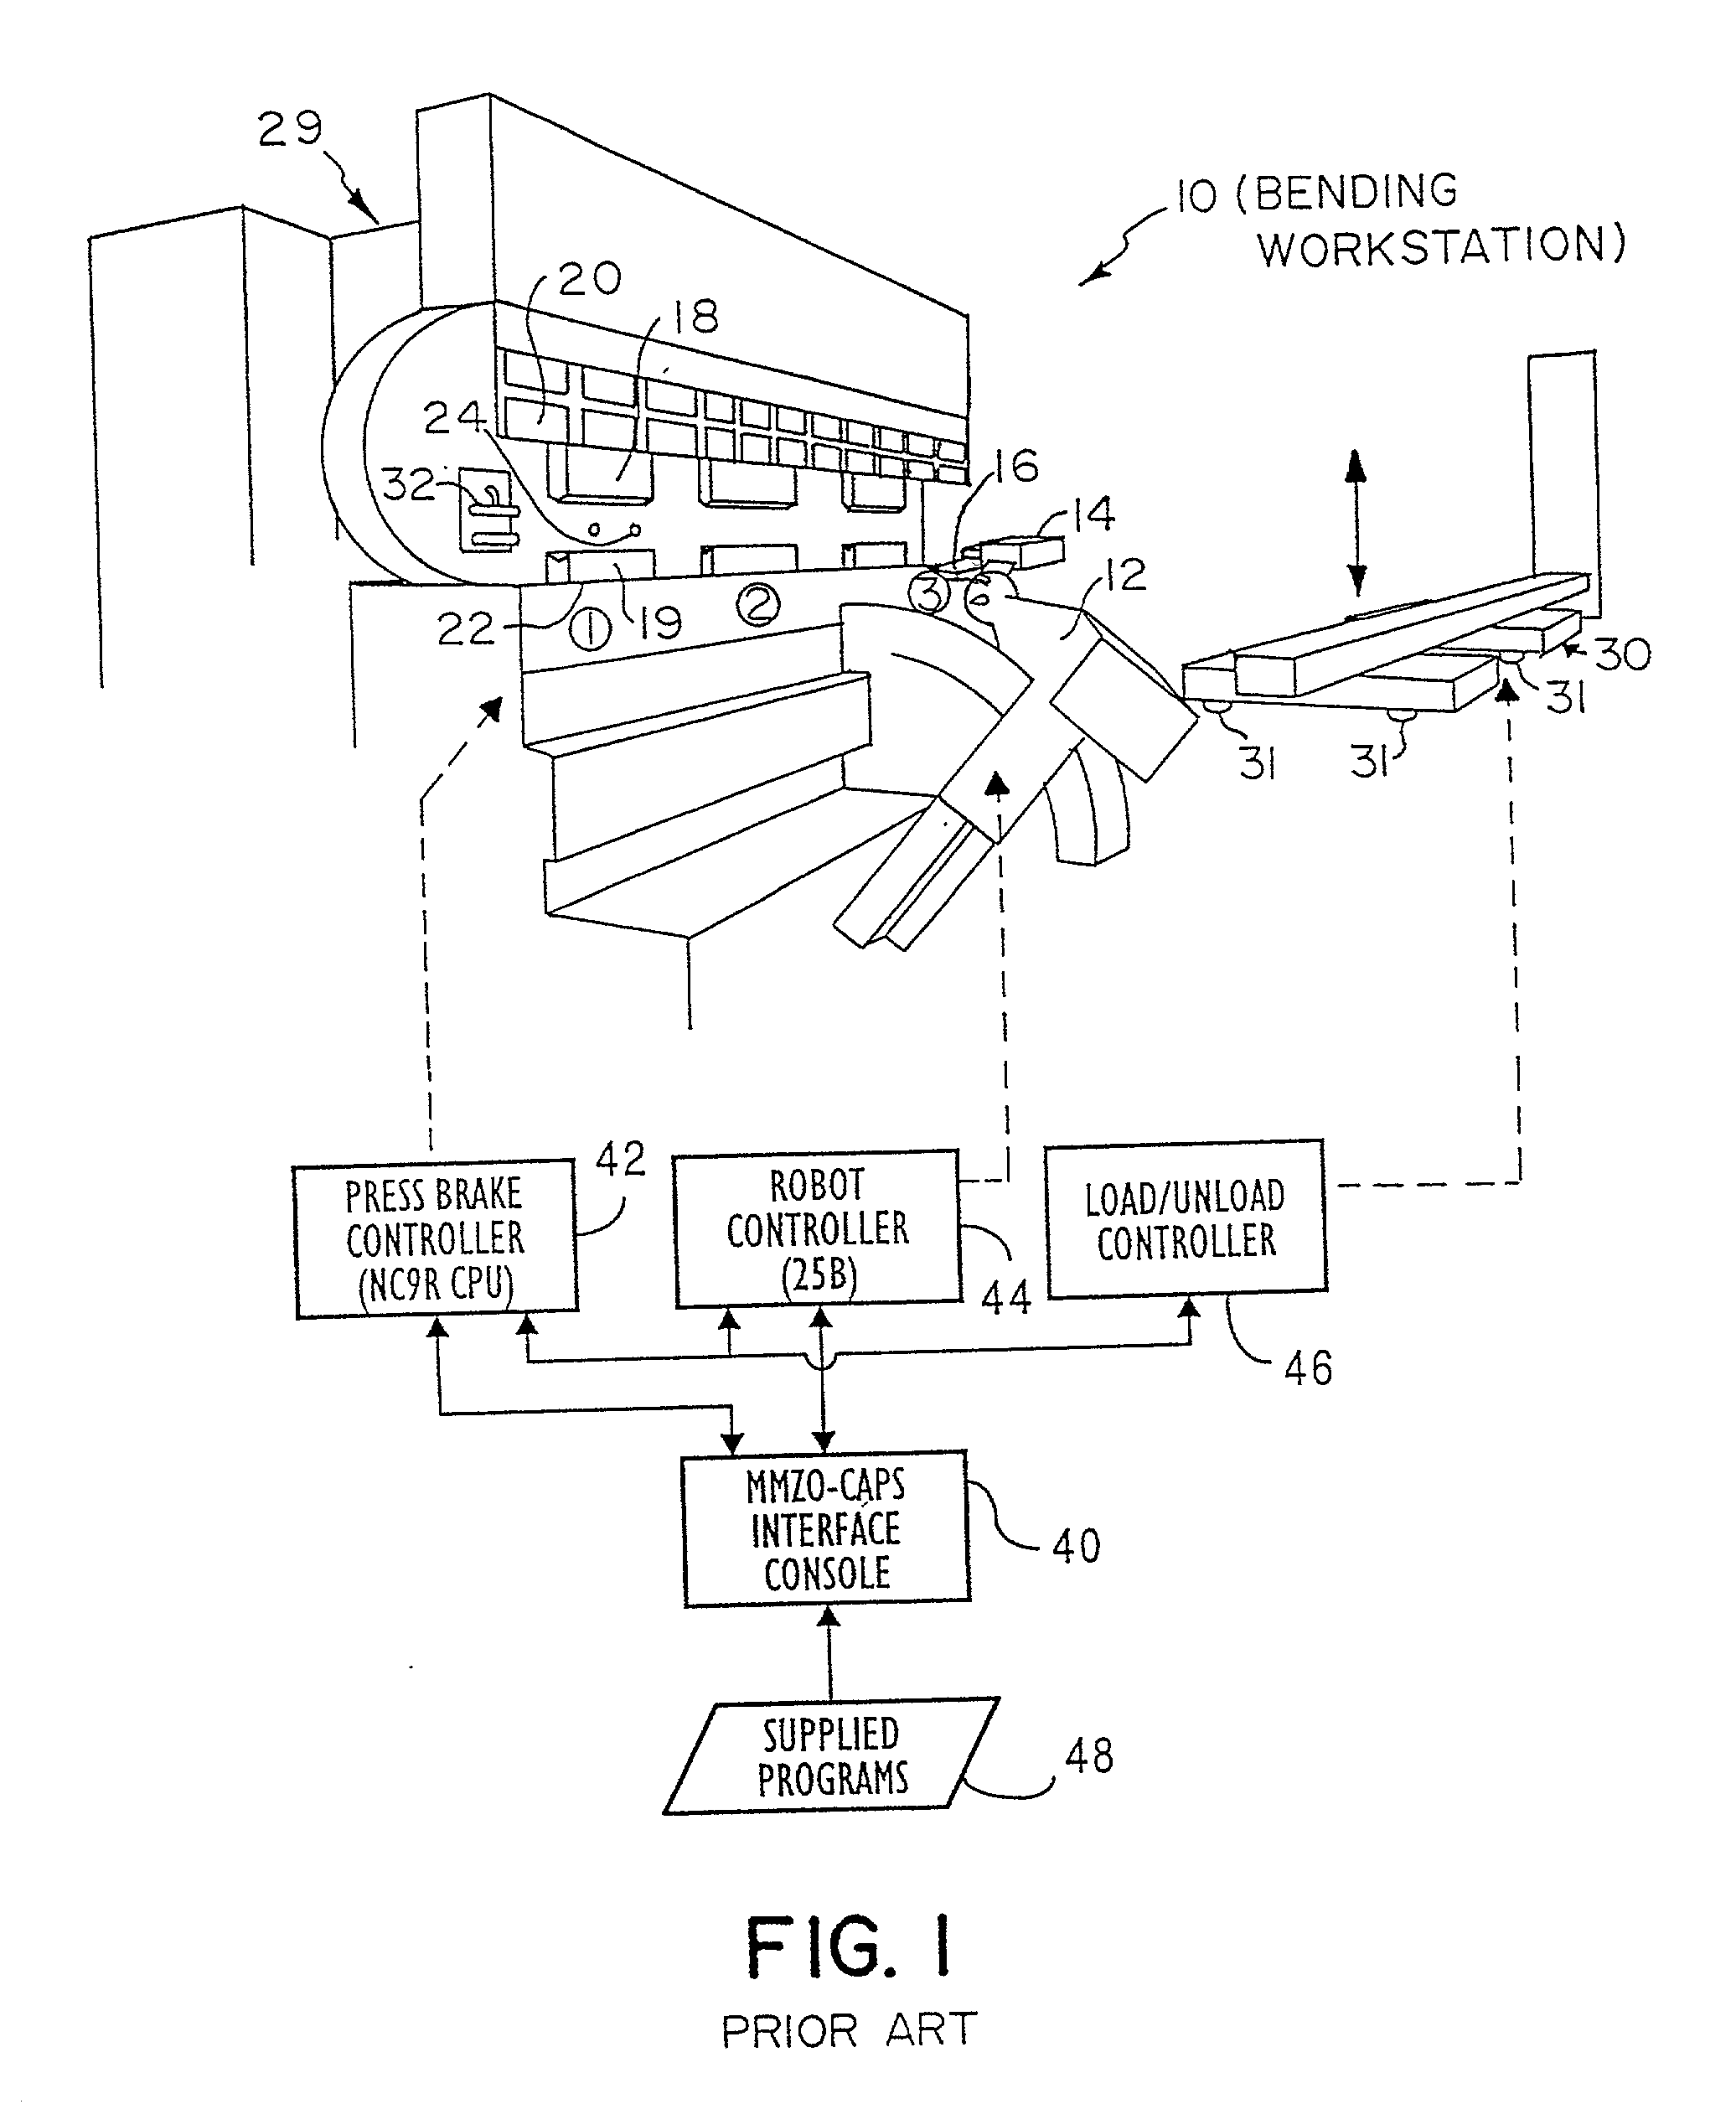 Intelligent system for generating and executing a sheet metal bending plan